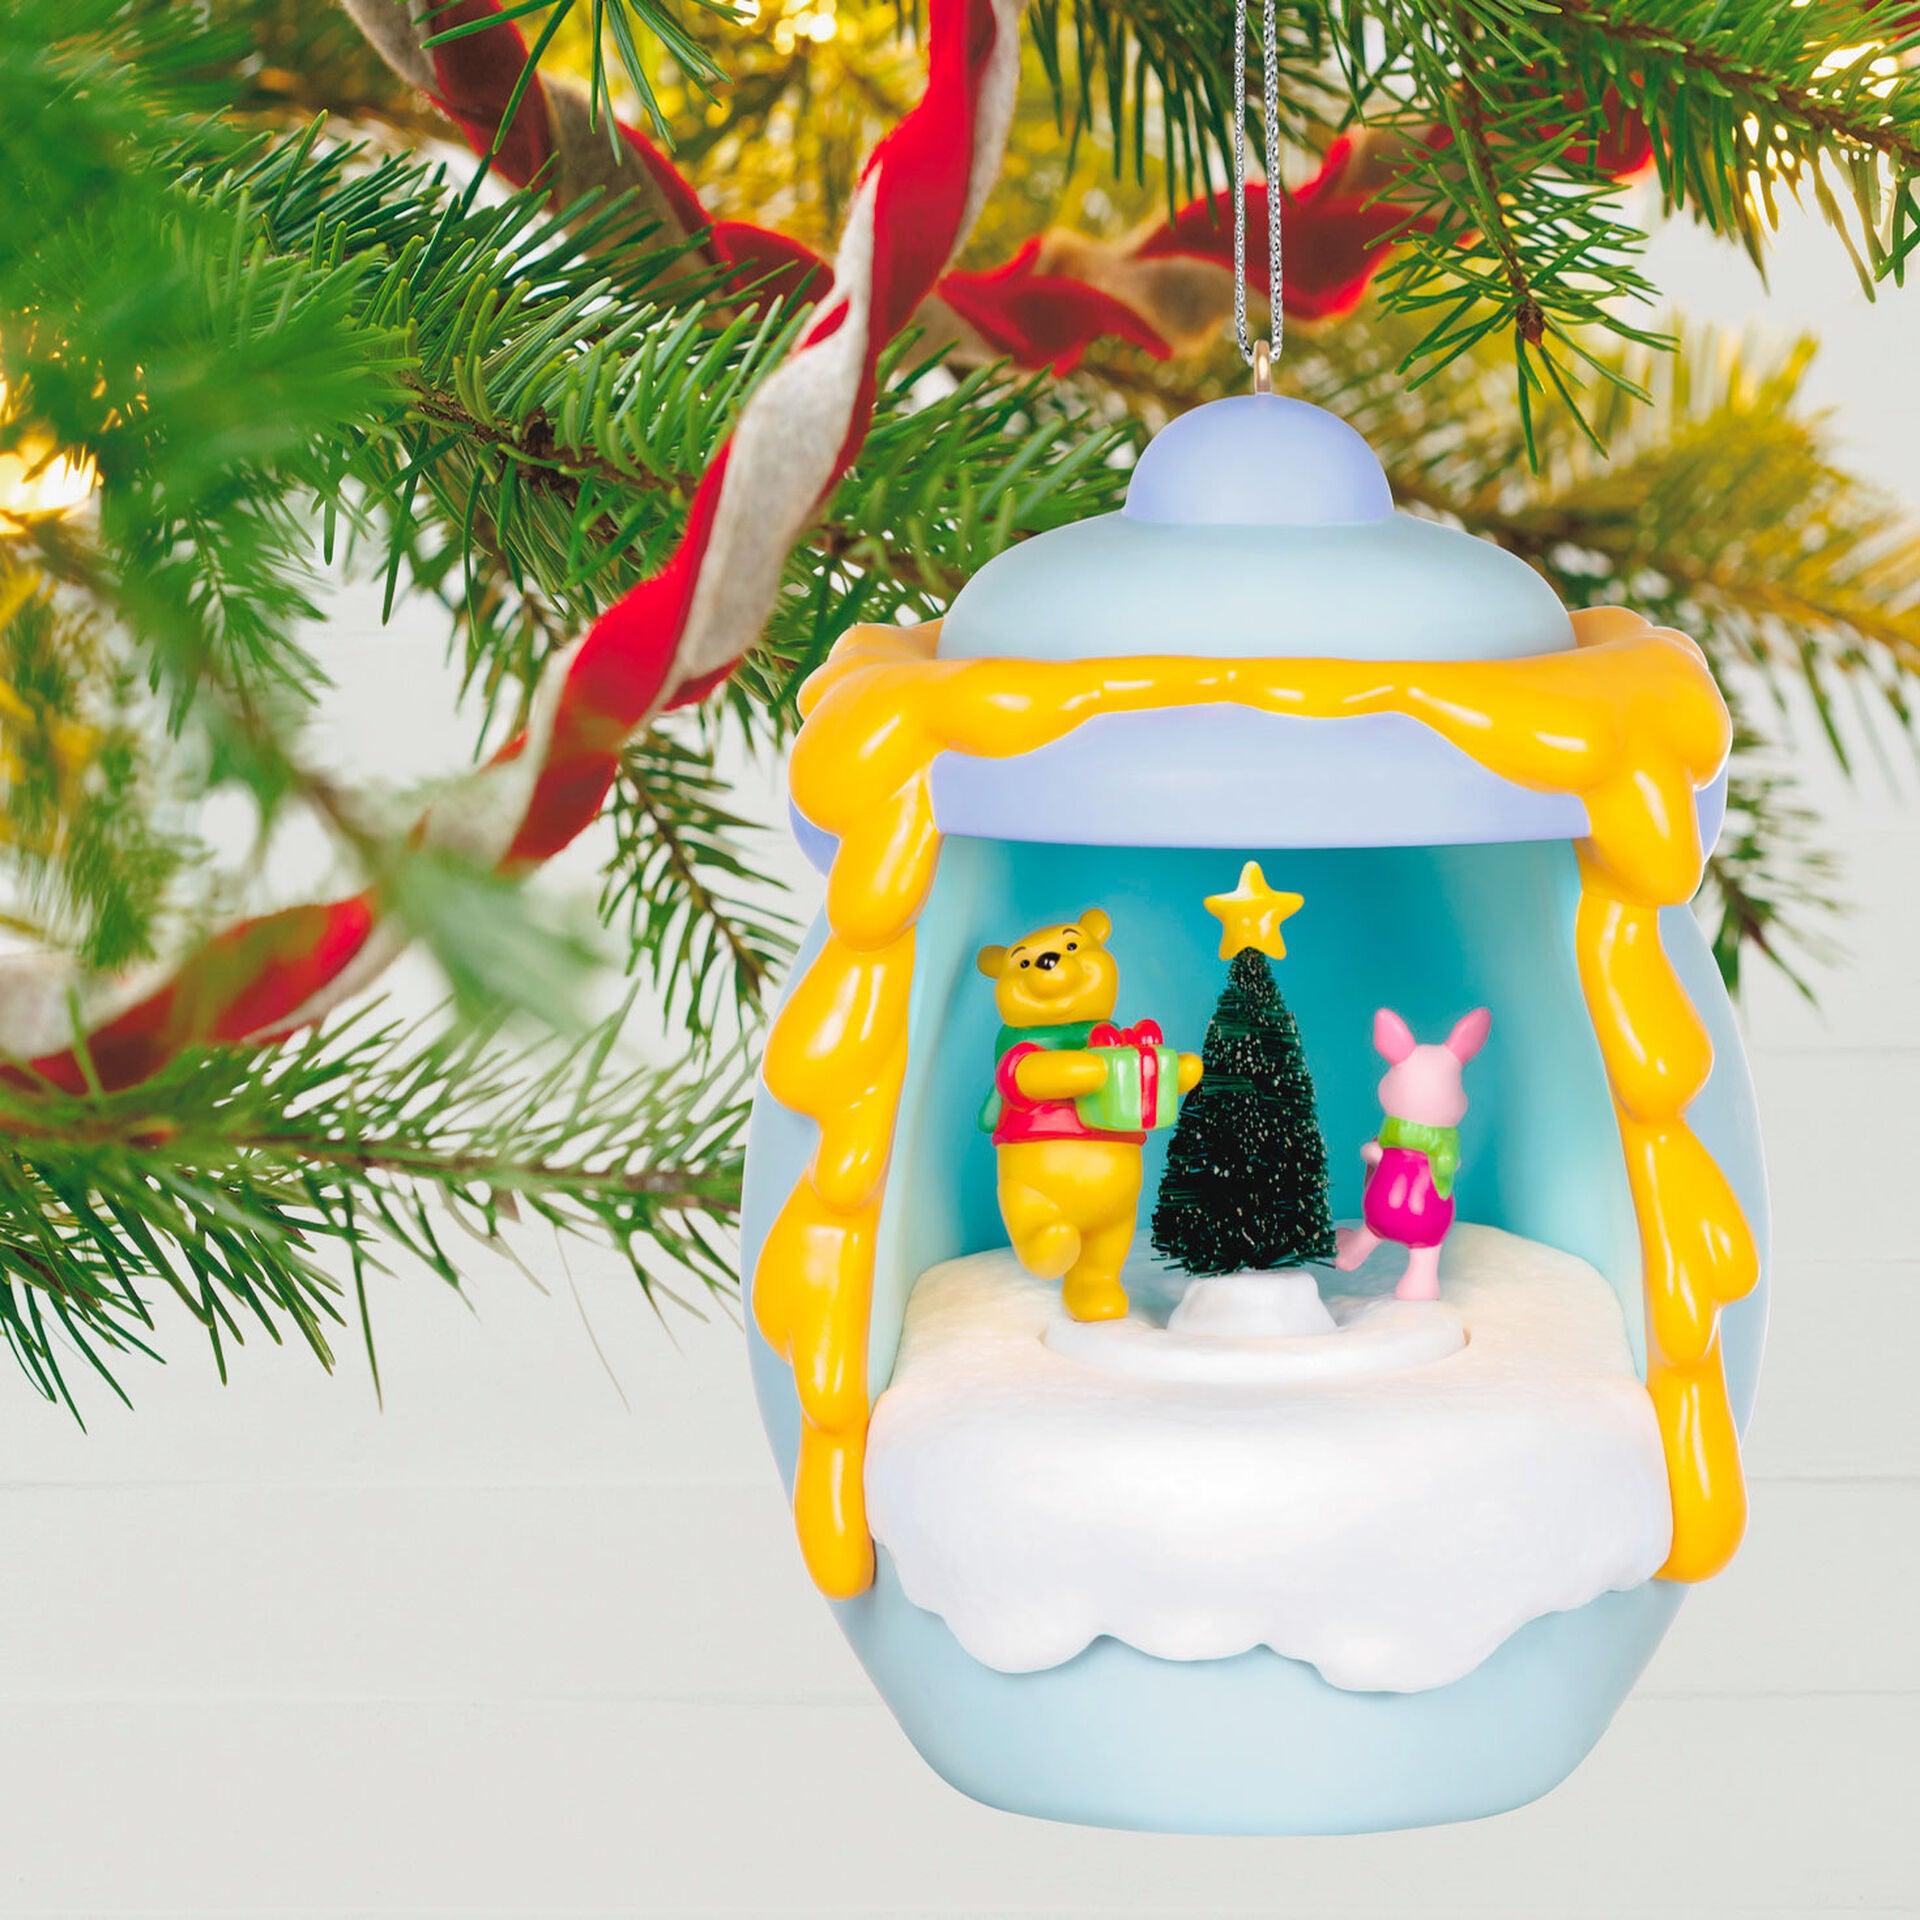 Disney Winnie the Pooh A Smallish Gift Ornament With Light and Motion